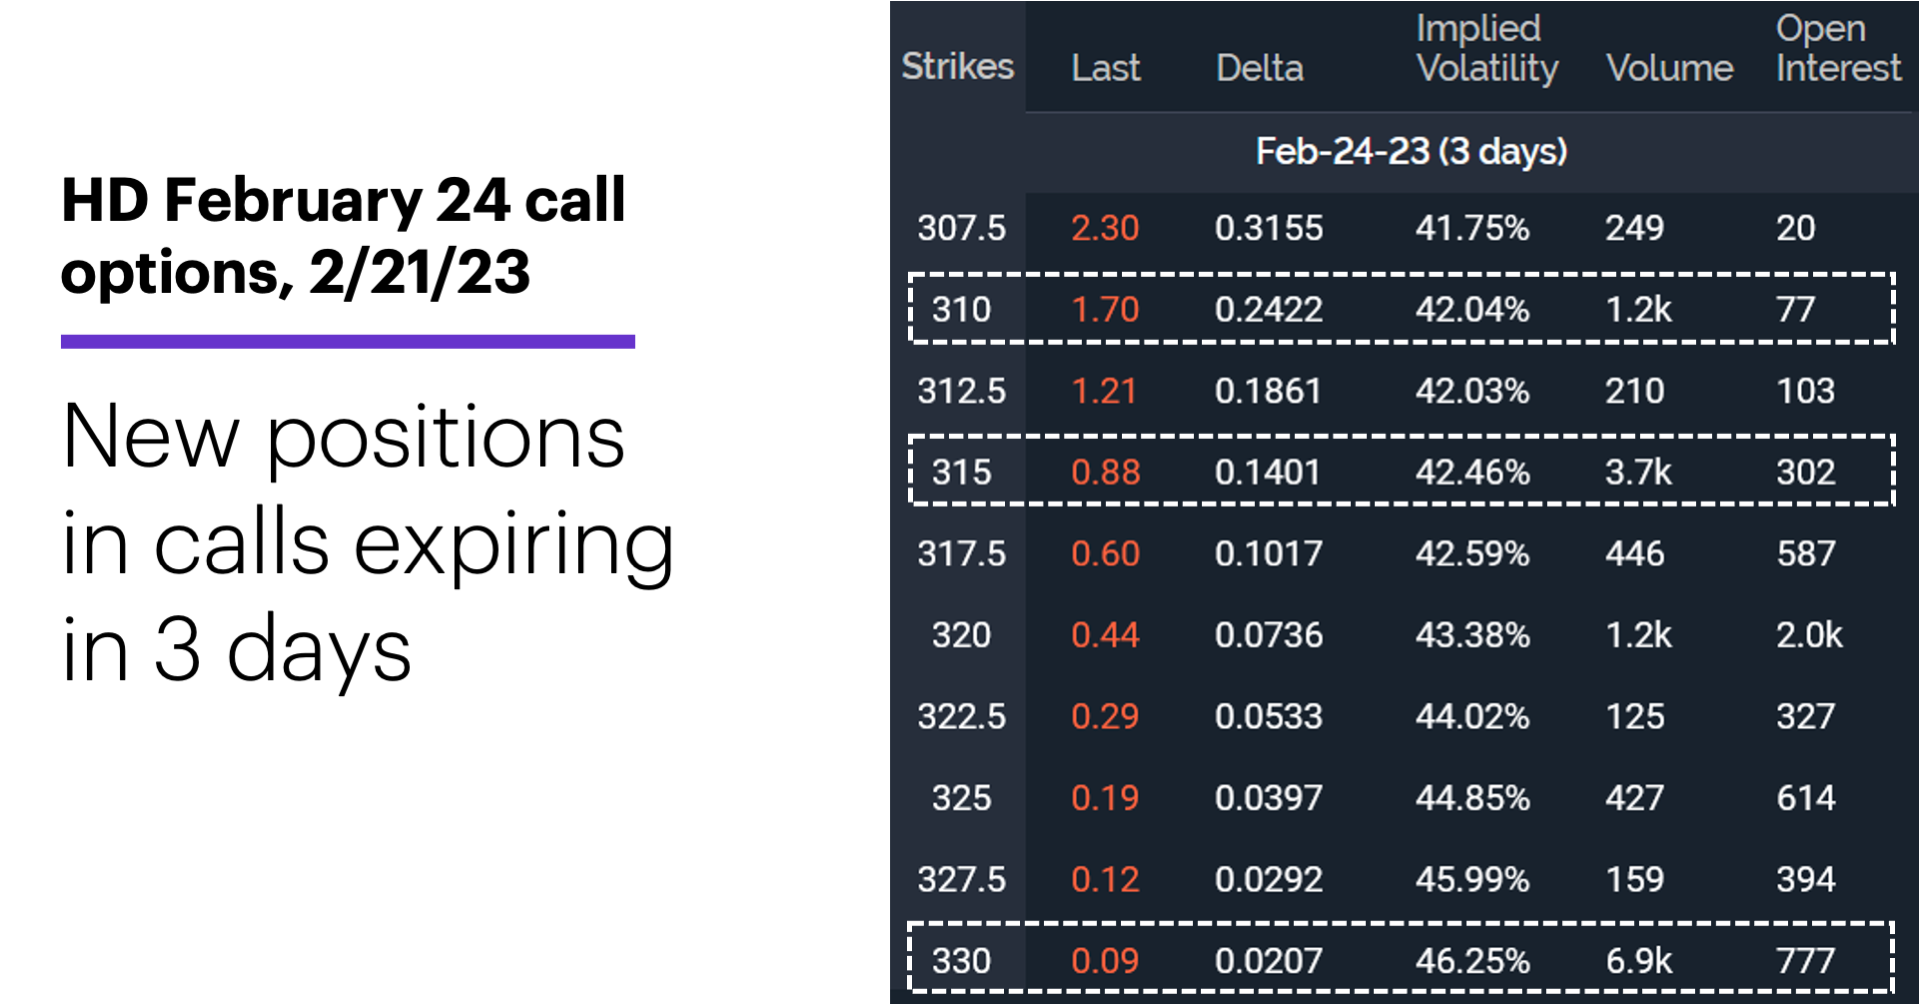 Chart 3: HD February 24 call options, 2/21/23. WWD put options chain. New positions in calls expiring in 3 days.